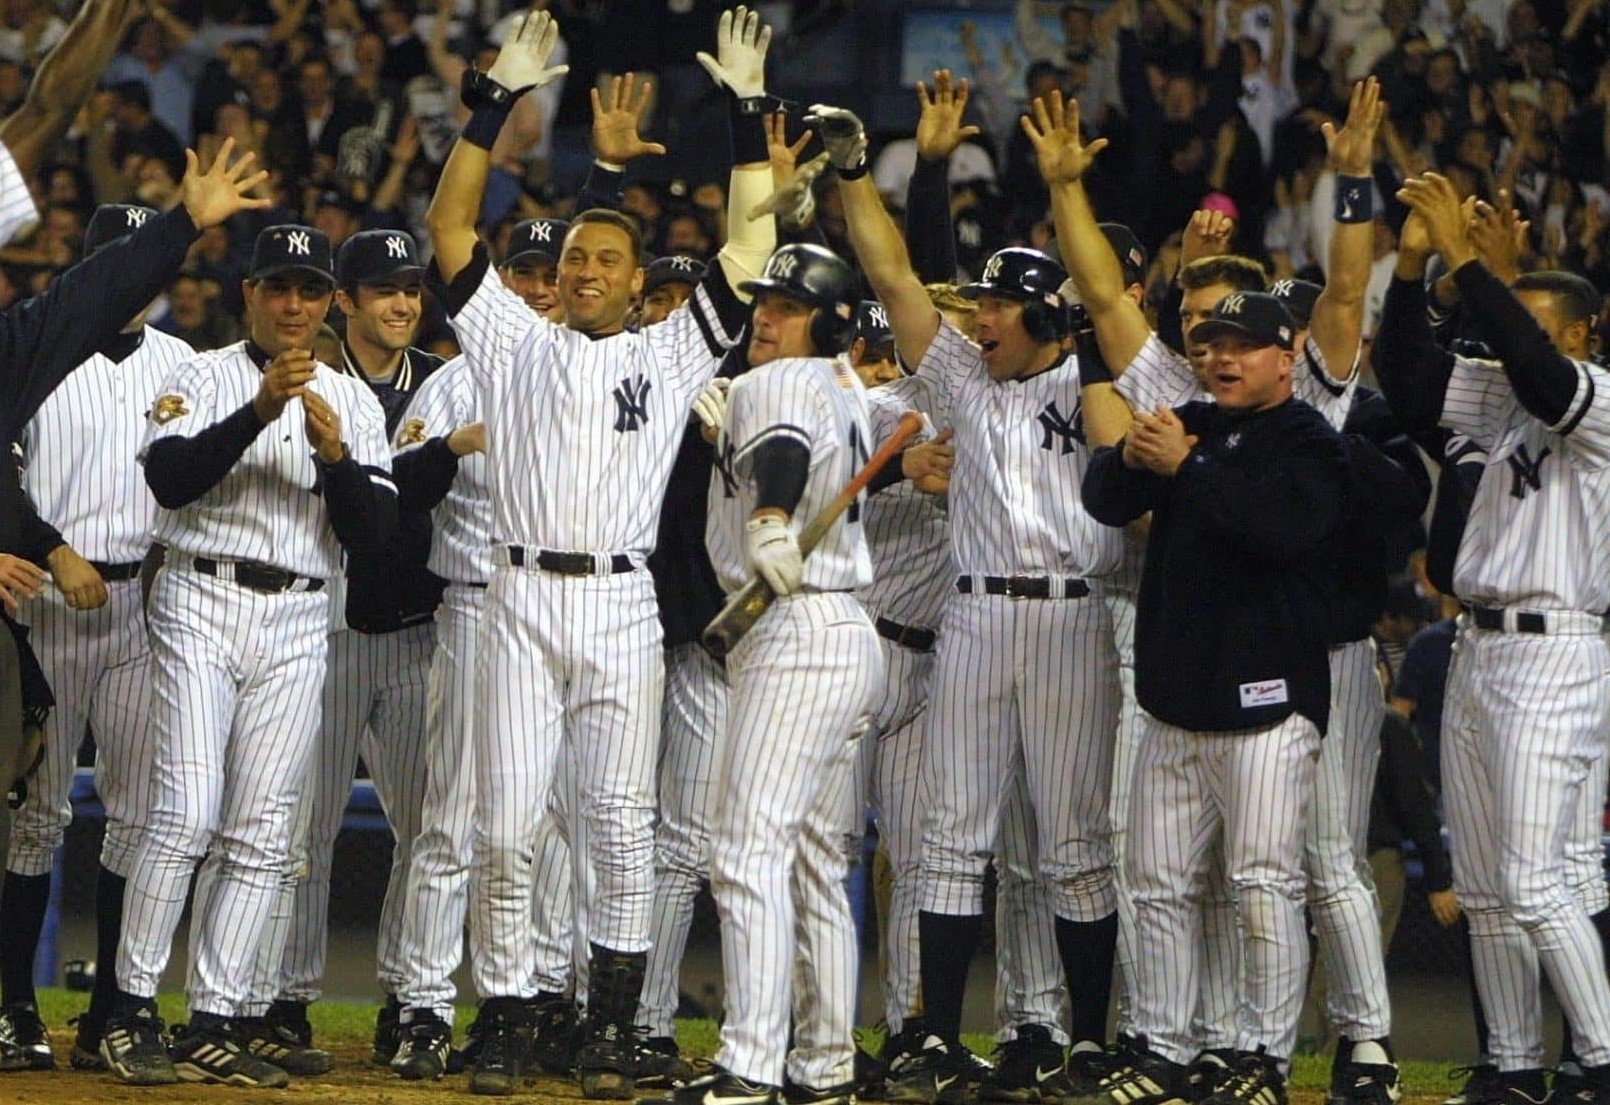 The New York Yankees after beating the Mets in the 2000 World Series Game 1 at Yankee Stadium on Oct, 21, 2000.